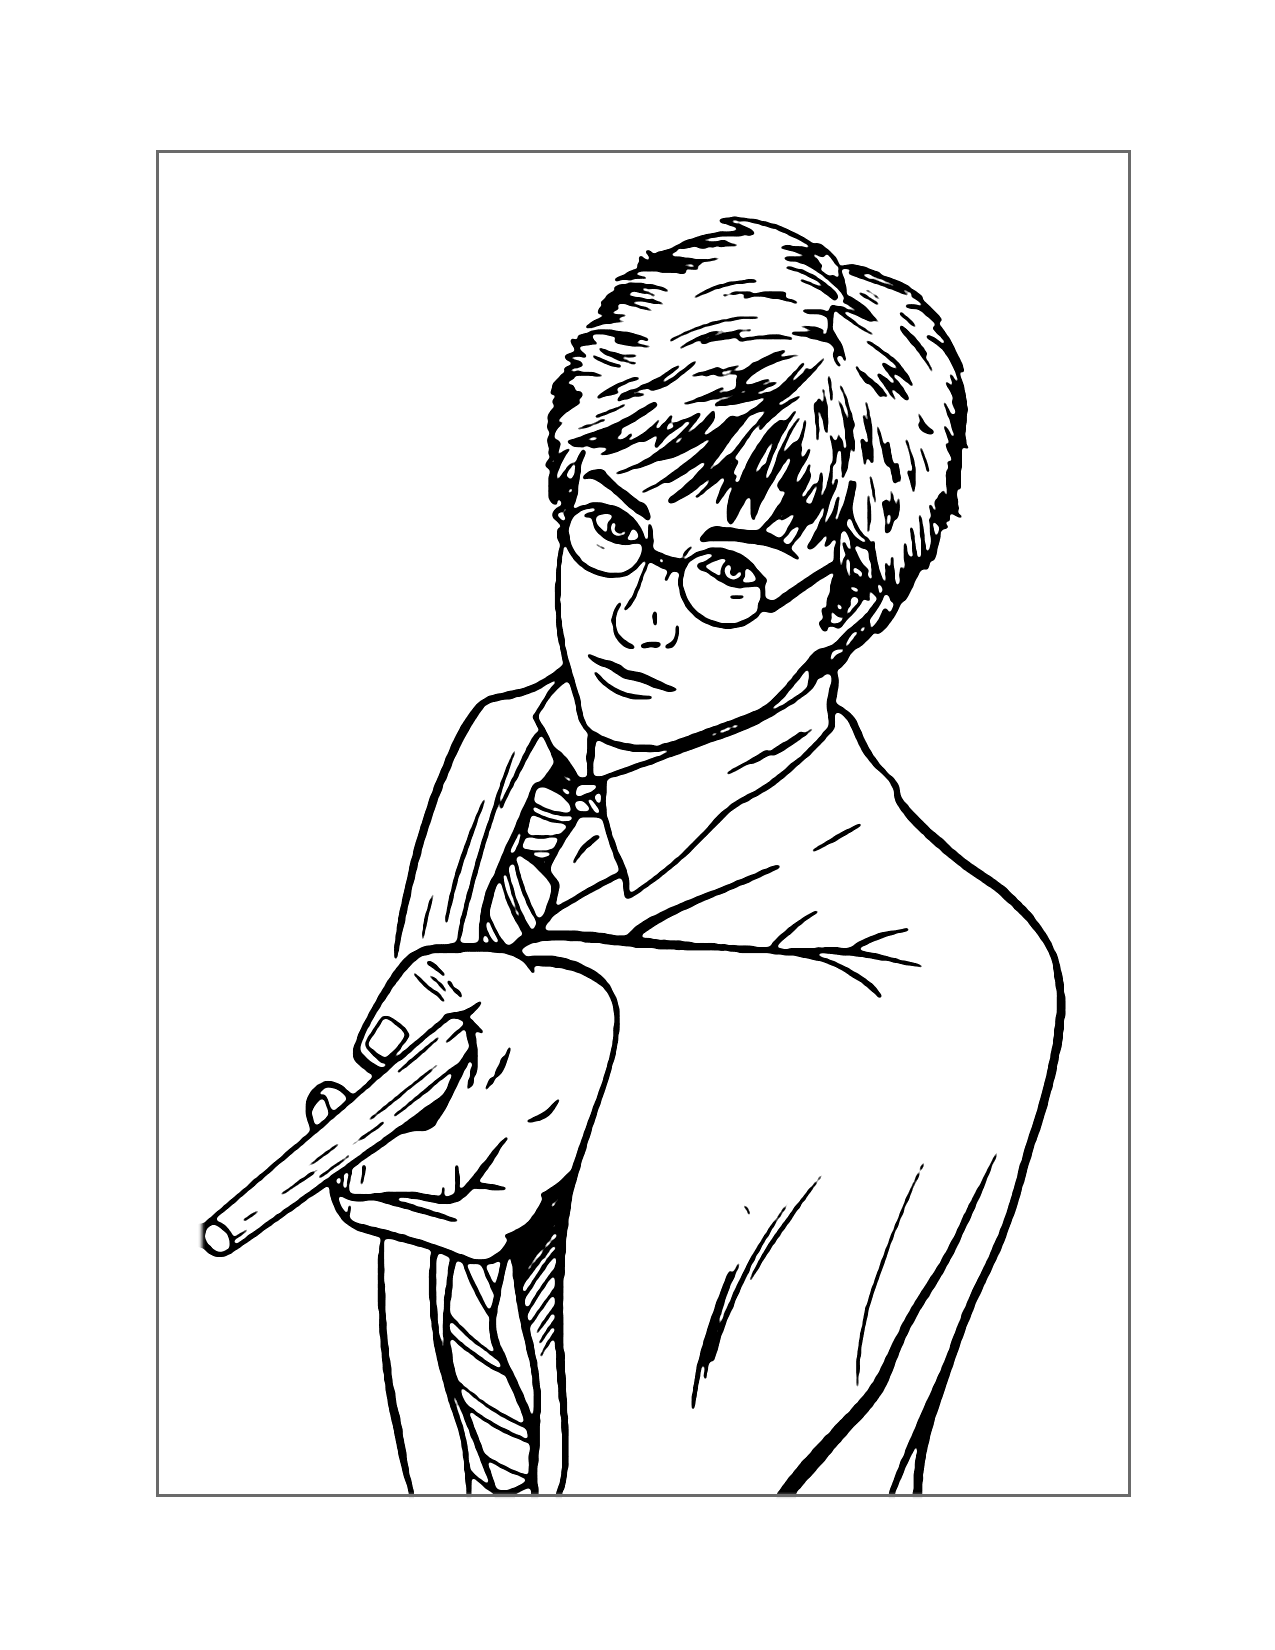 Harry Potter Weilding His Wand Coloring Page